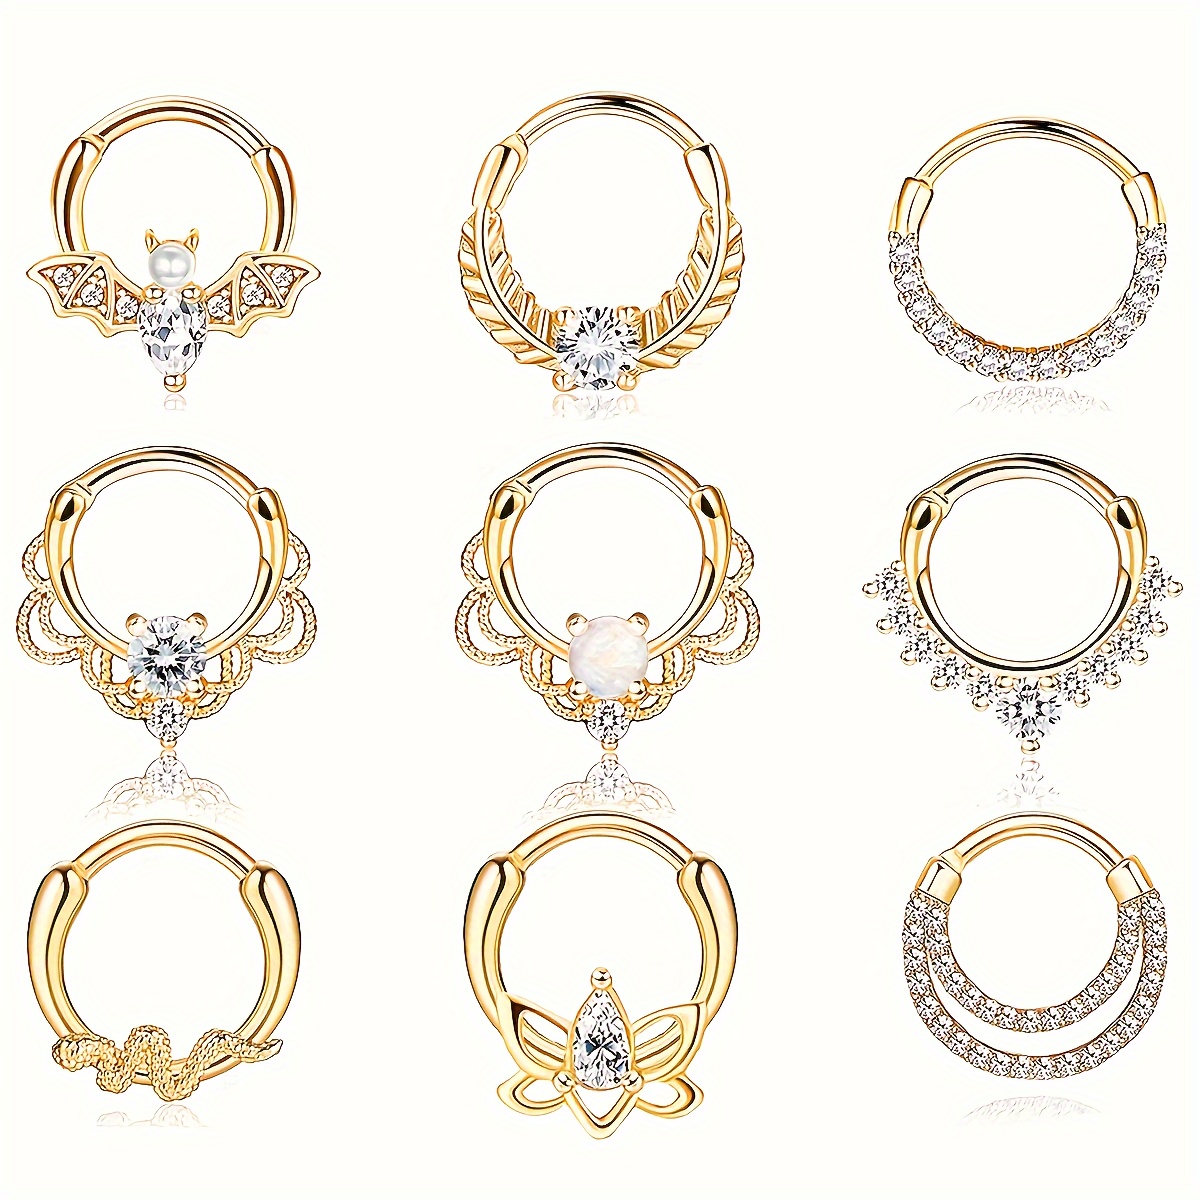 

9pcs Piercing Stainless Steel Nose Ring Set, Different Shapes Of Septum Ring, Zircon, Opal, Snake, Bat, Leaf, Lotus, Flat Double U-shaped Zircon Decor Nose Hoop Ring Body Piercing Jewelry